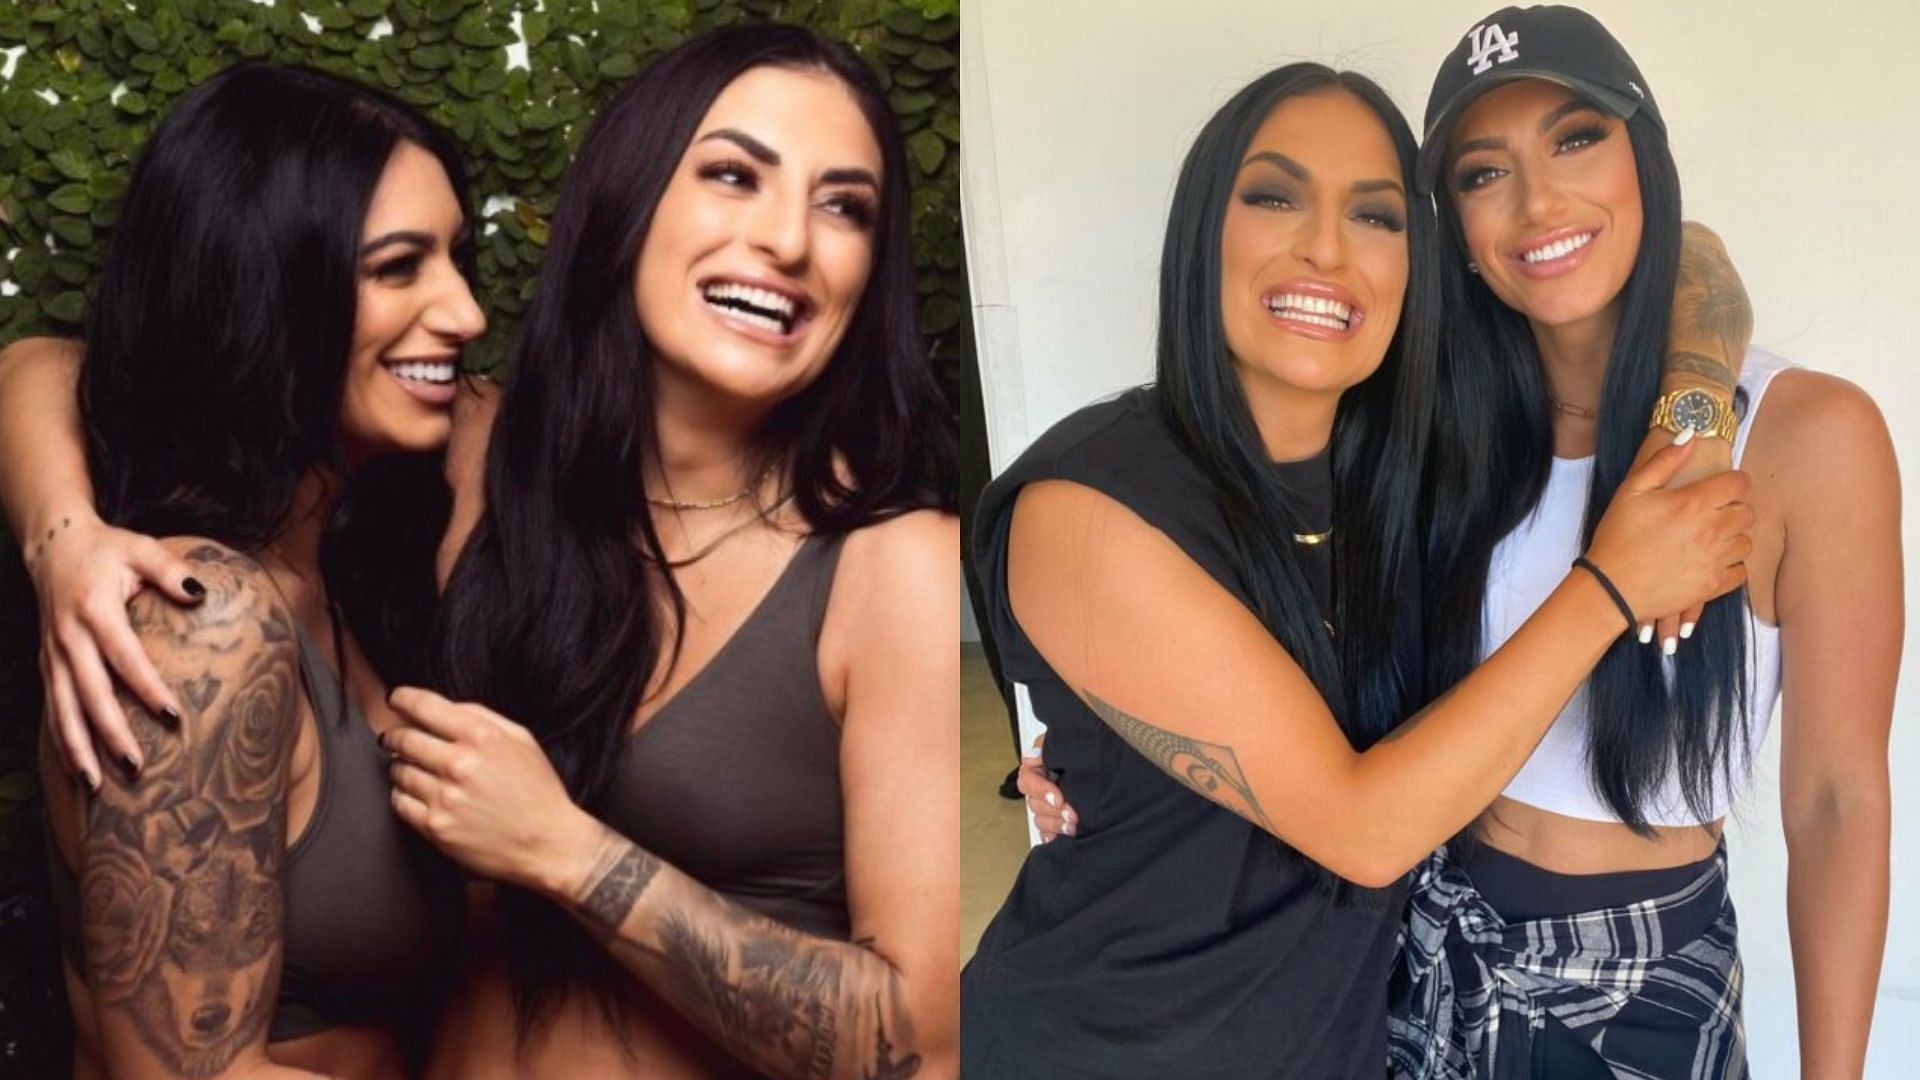 Sonya Deville is engaged to her girlfriend